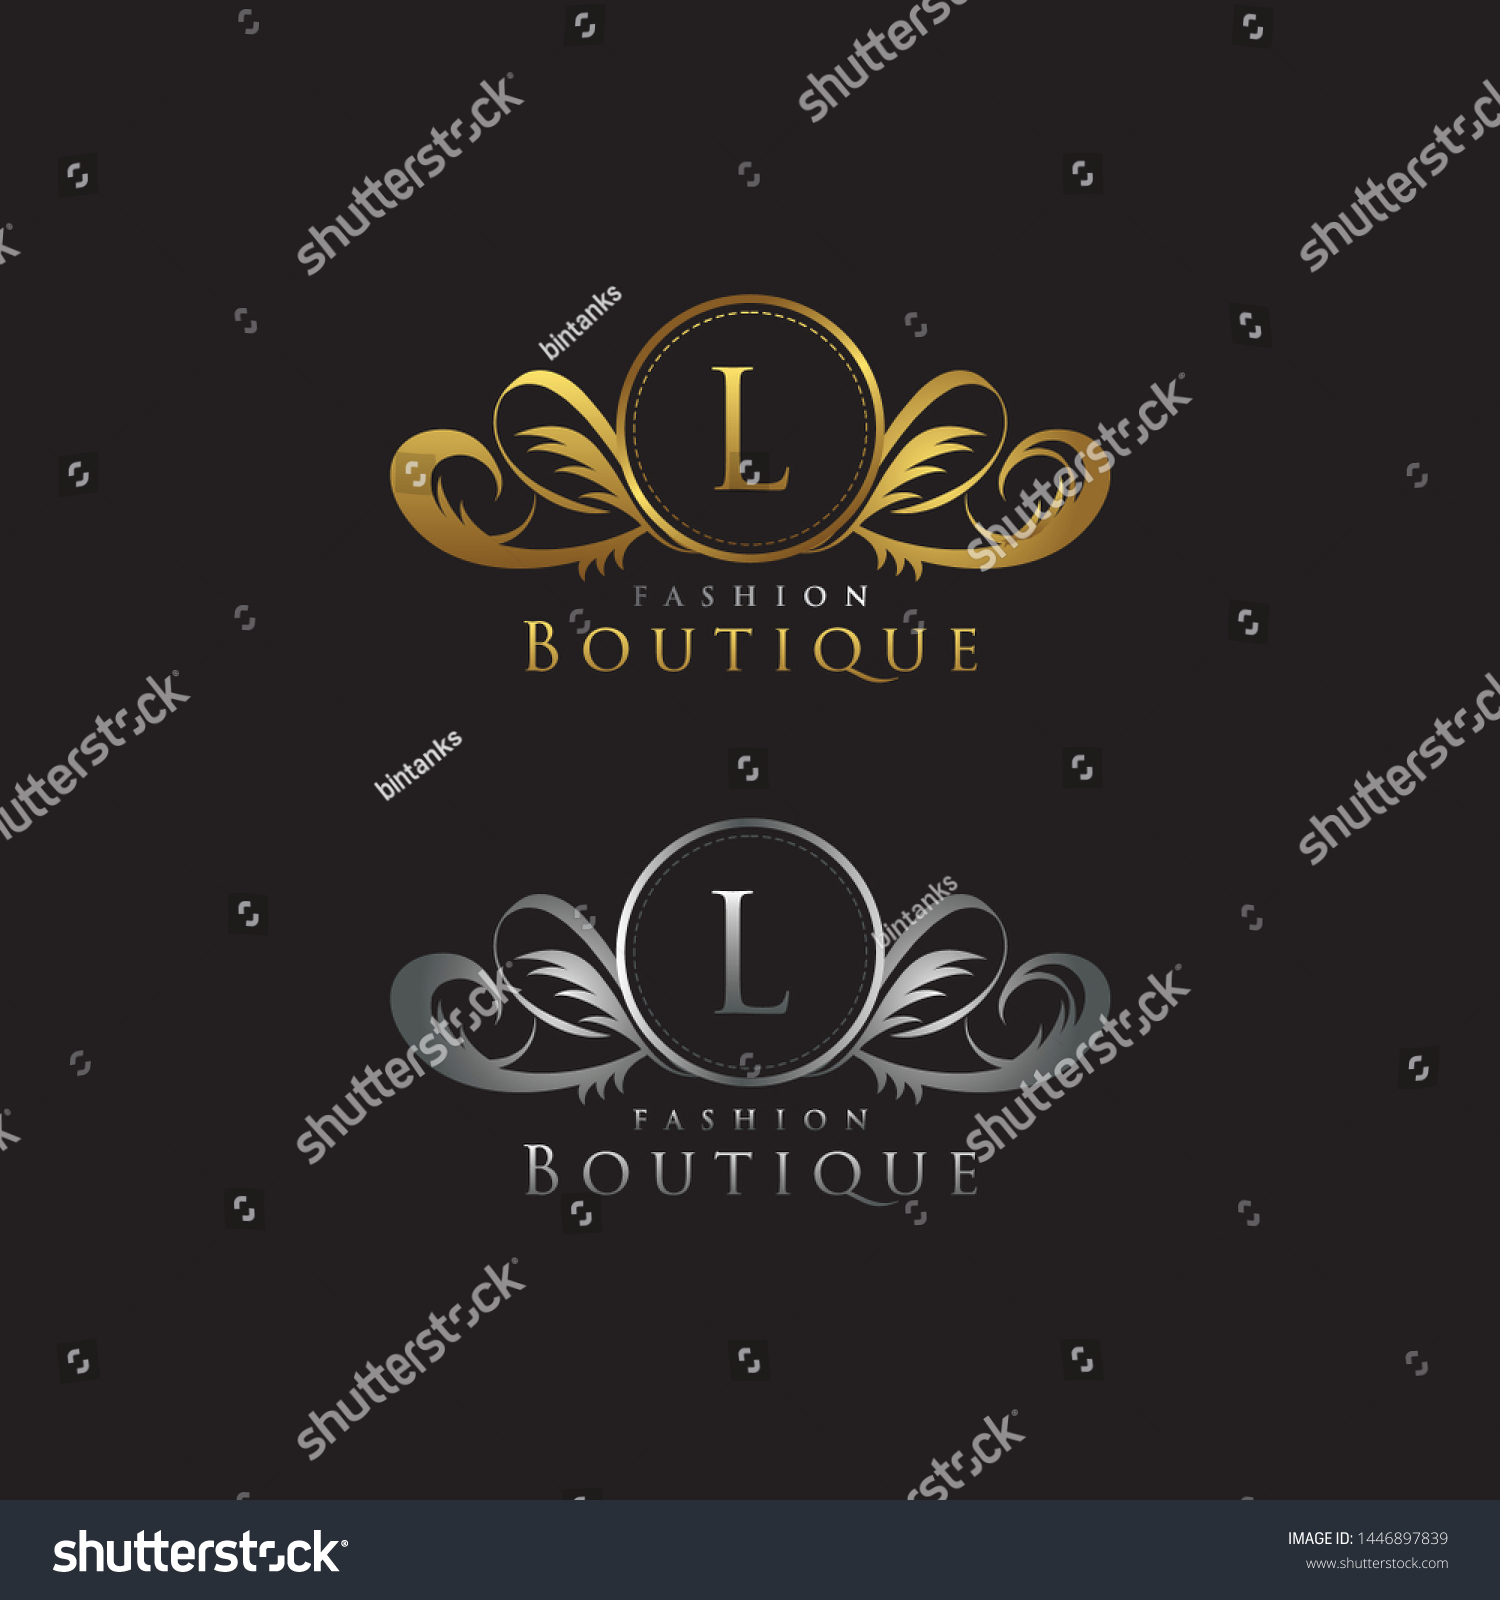 Golden L Letter Luxury Boutique Heraldic Stock Vector (Royalty Free ...